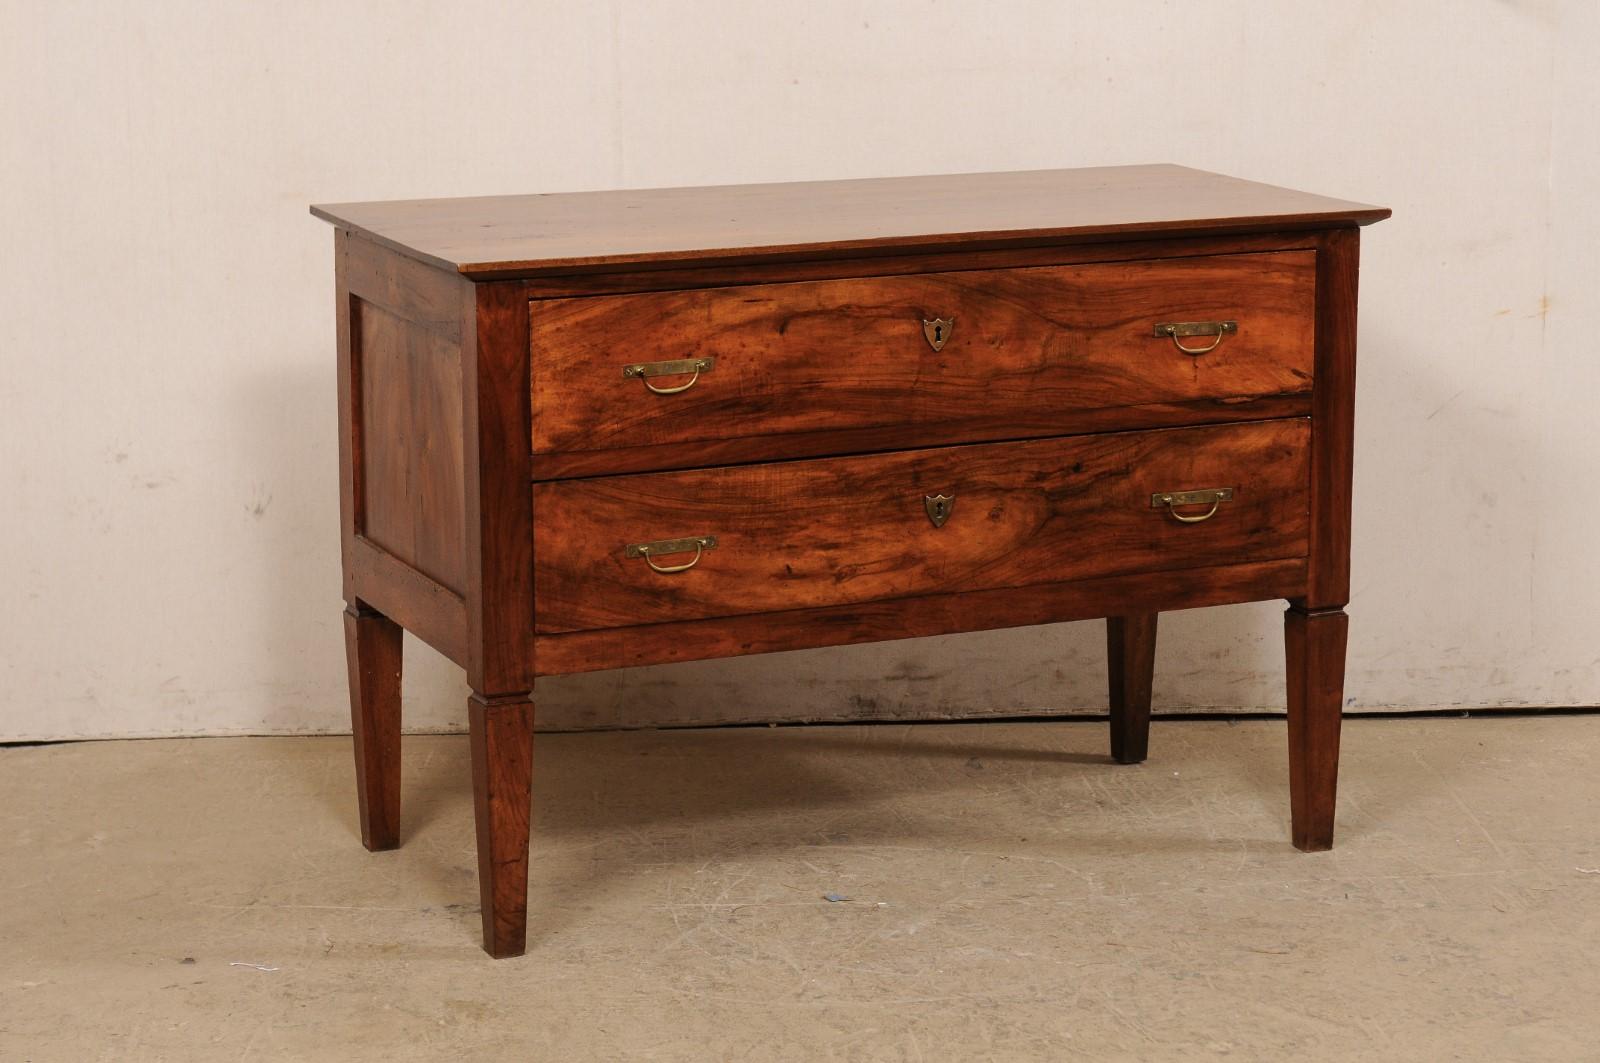 An Italian walnut raised chest of two drawers from the mid 19th century. This antique cassettiera (chest of drawers) from Italy features a rectangular-shaped top, which slightly overhands the case below which houses two full-sized drawers, each